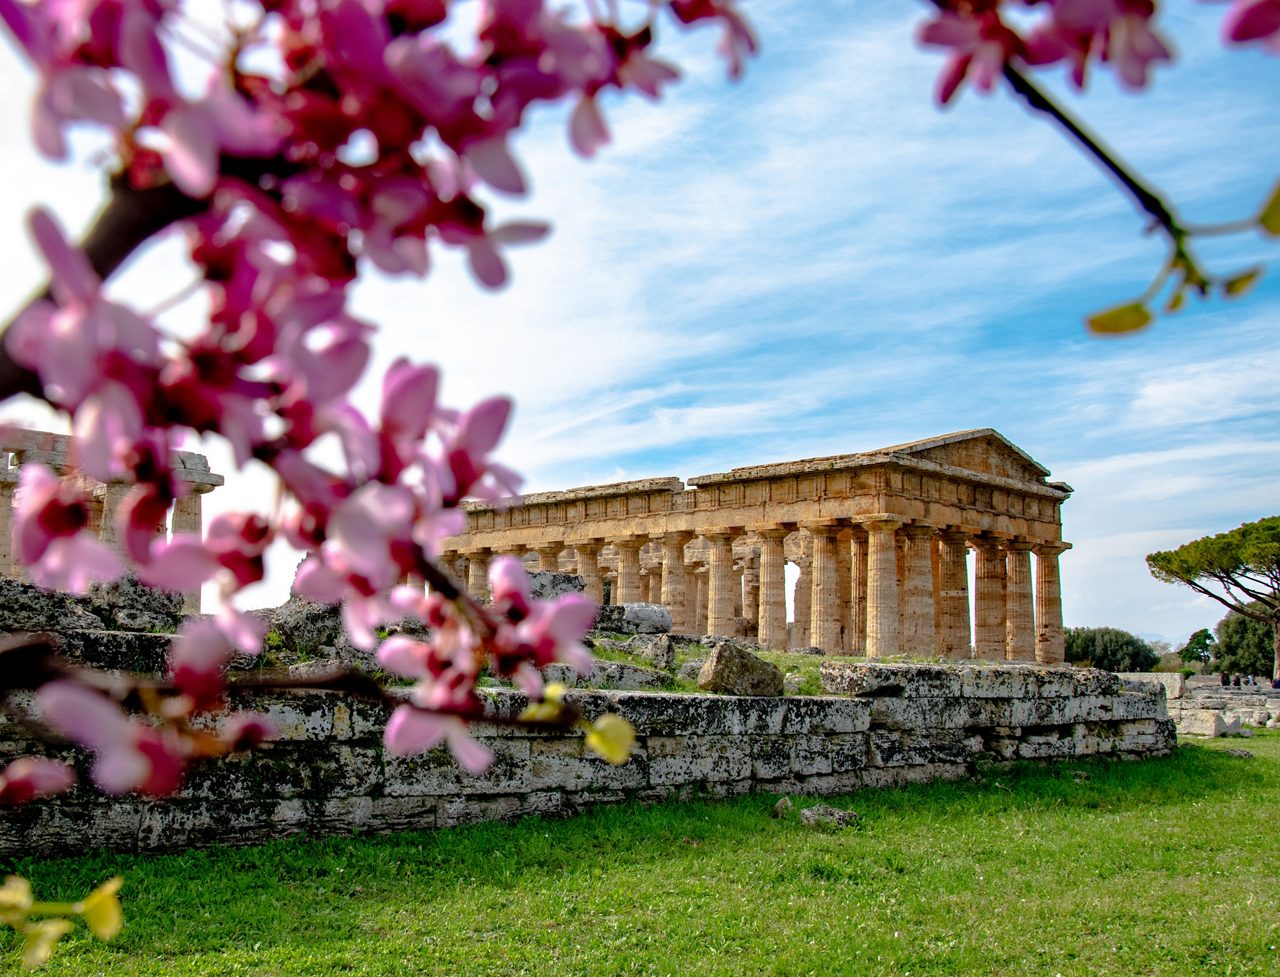 Beautiful view of a Paestum ruin under a blossom tree